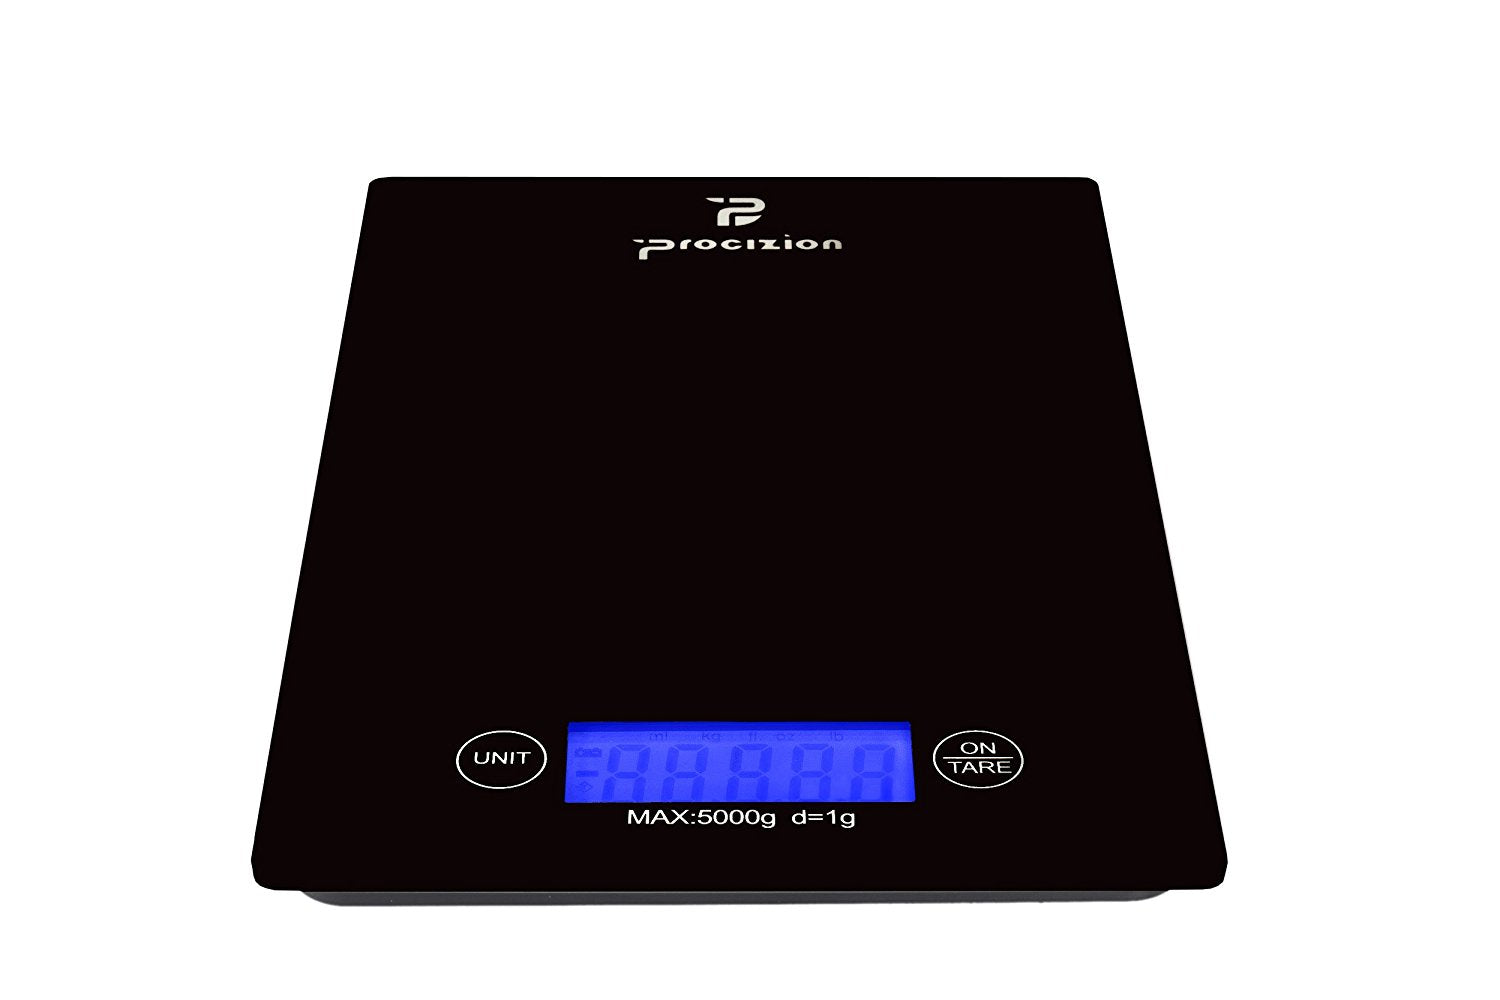 Digital Kitchen Food Scale For Precise WeighingMeasures Up To 11